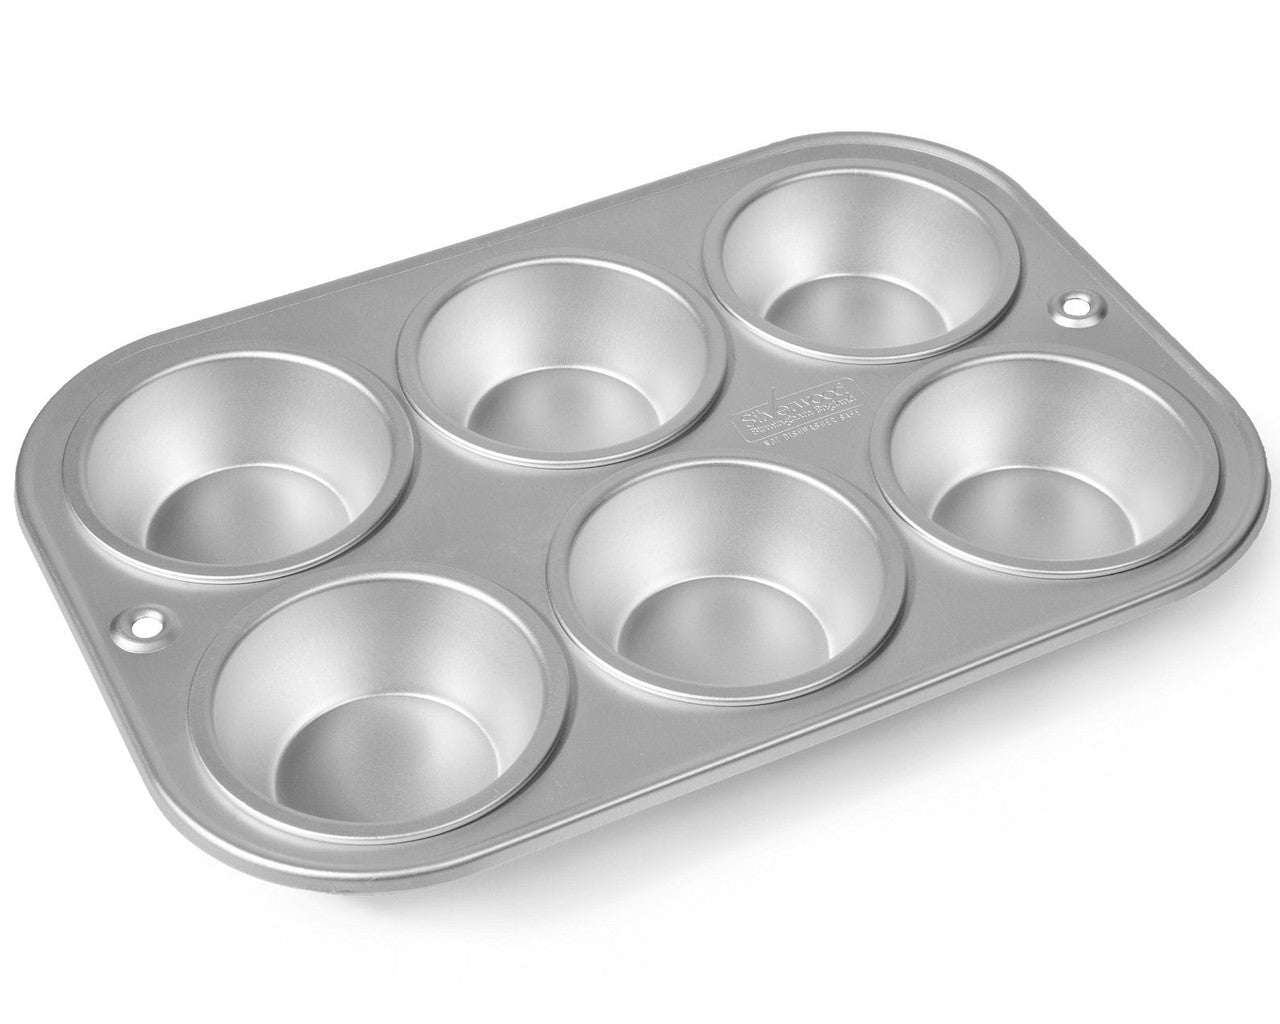 6 Cup Muffin/Cupcake Tray from Silverwood Bakeware. Handmade in the UK.